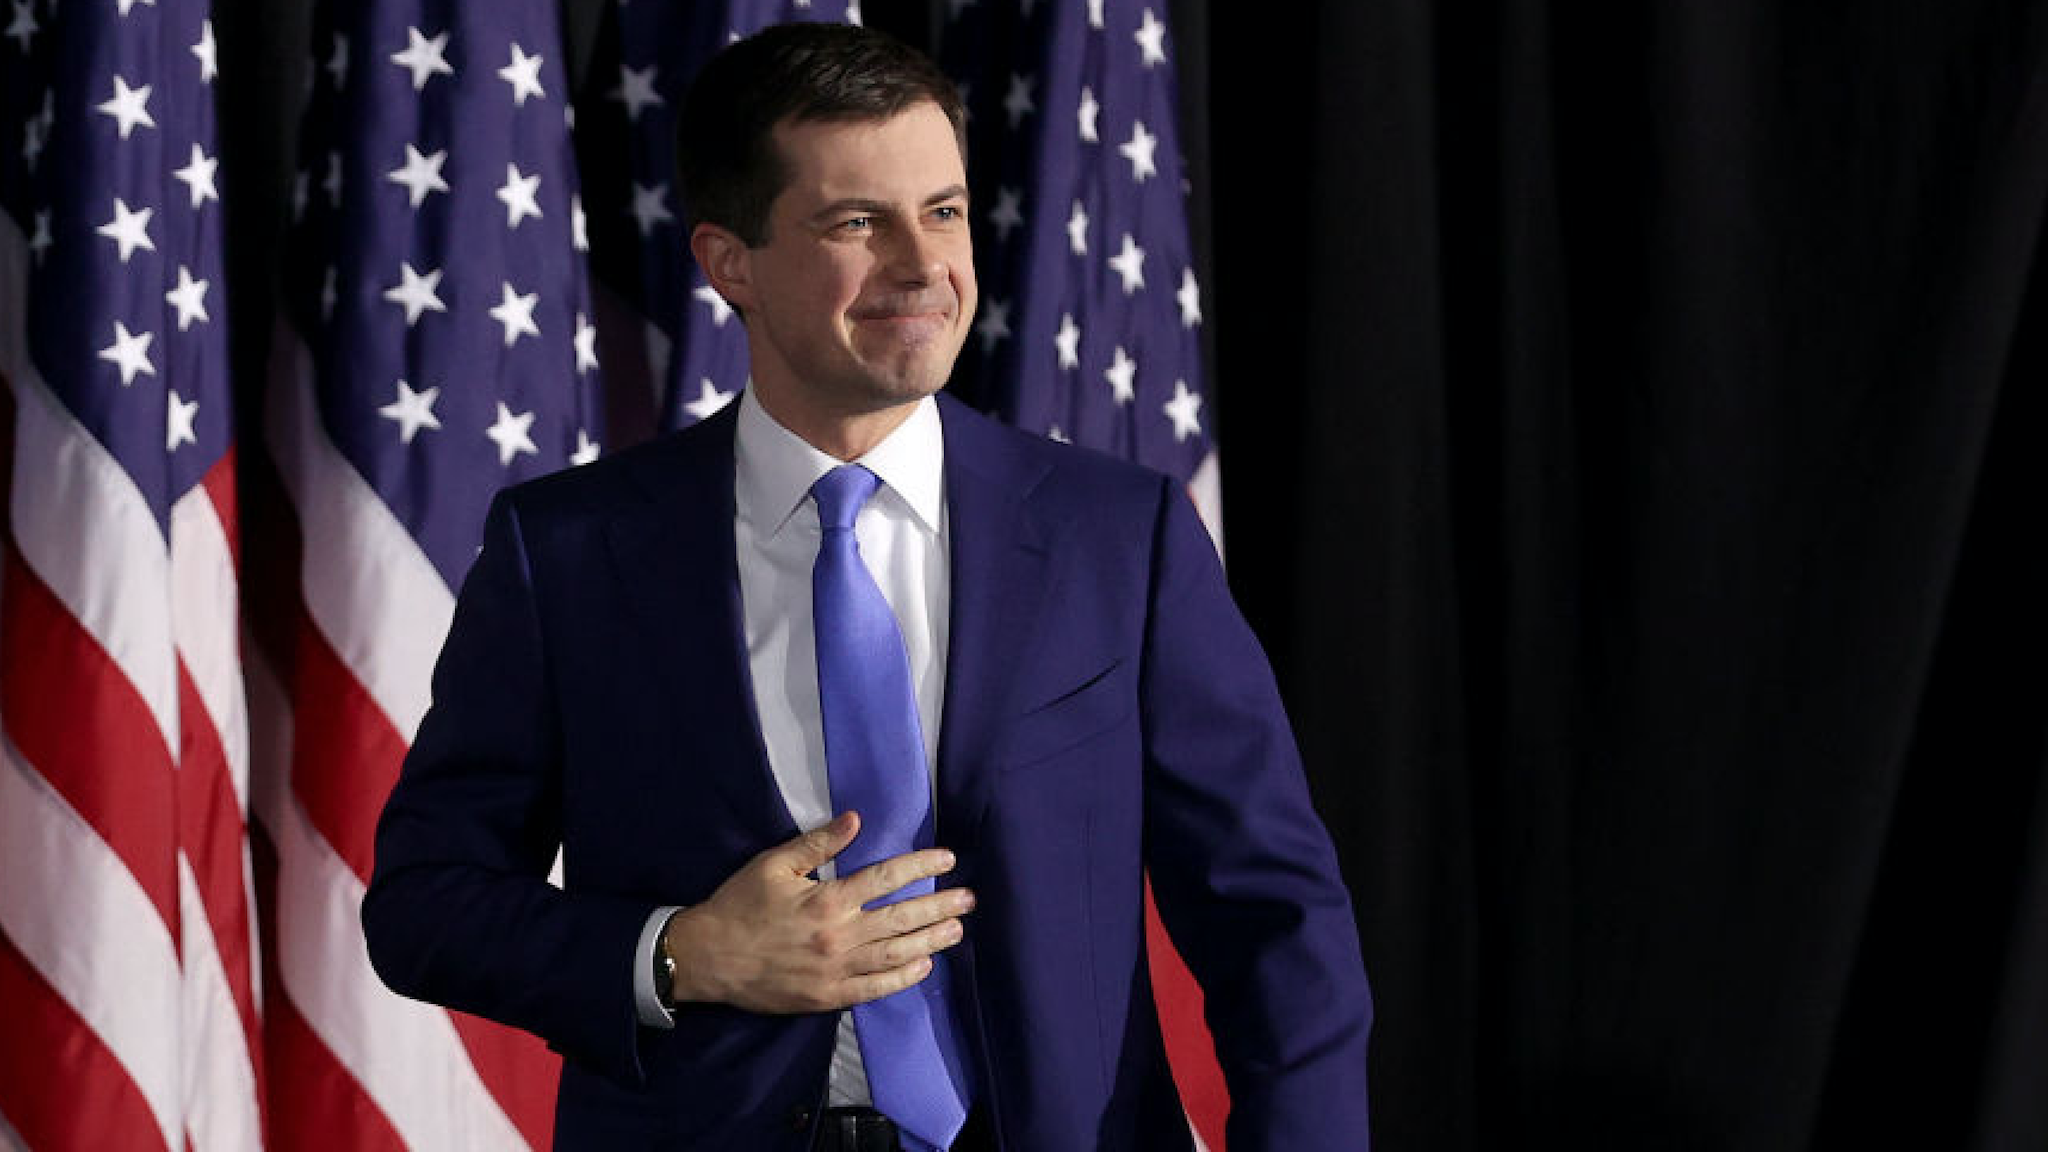 Democratic presidential candidate former South Bend, Indiana Mayor Pete Buttigieg arrives at a watch party at Drake University on February 03, 2020 in Des Moines, Iowa.